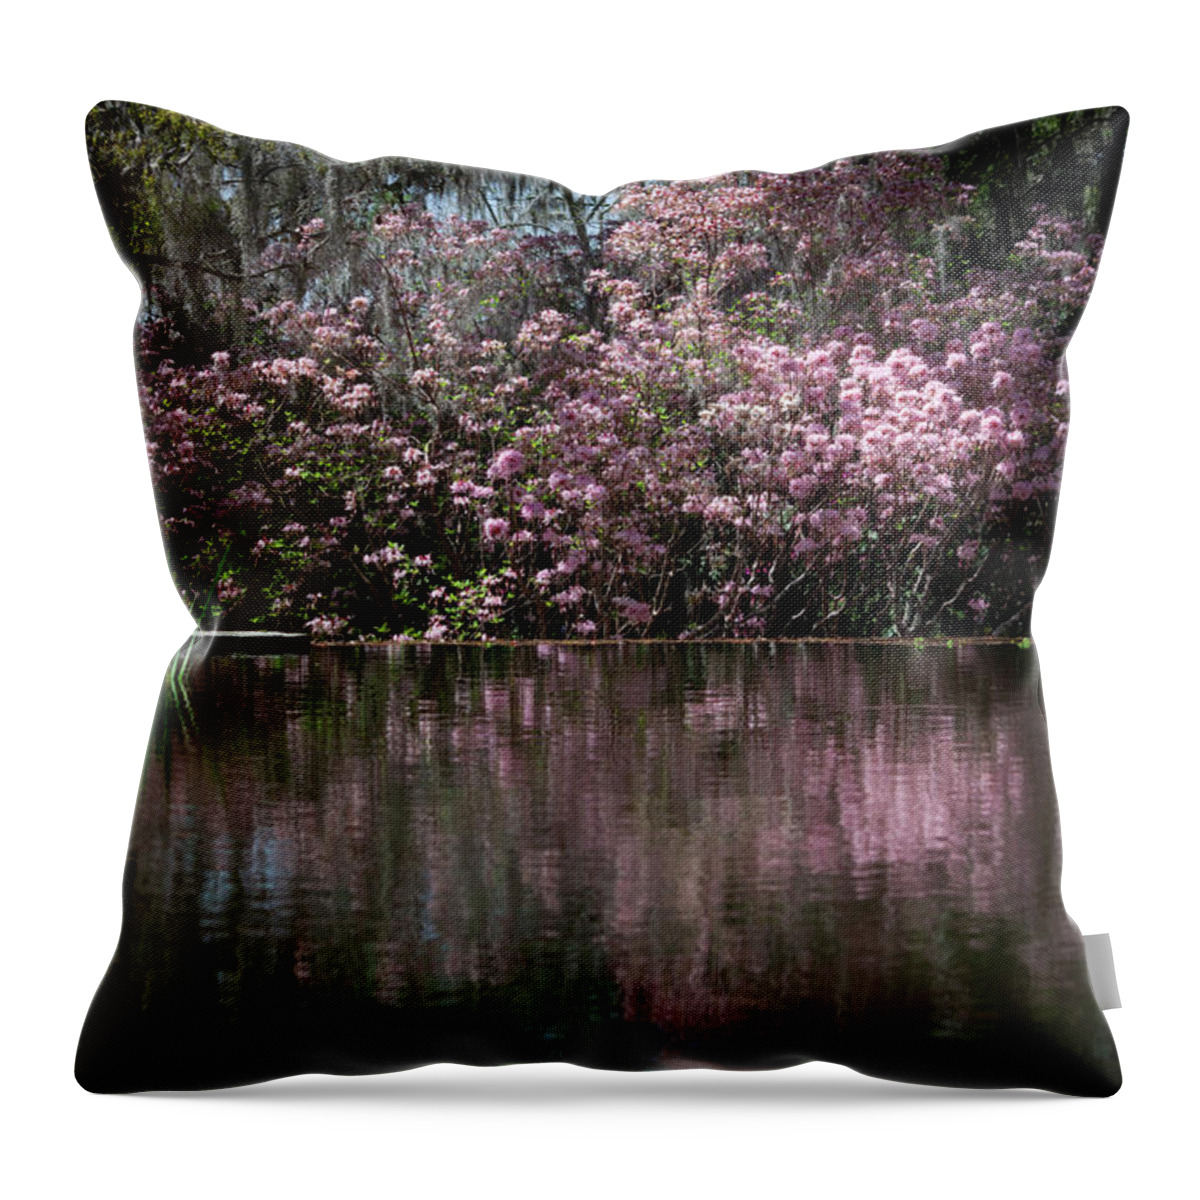 Photograph Throw Pillow featuring the photograph Pink Magic I by Suzanne Gaff